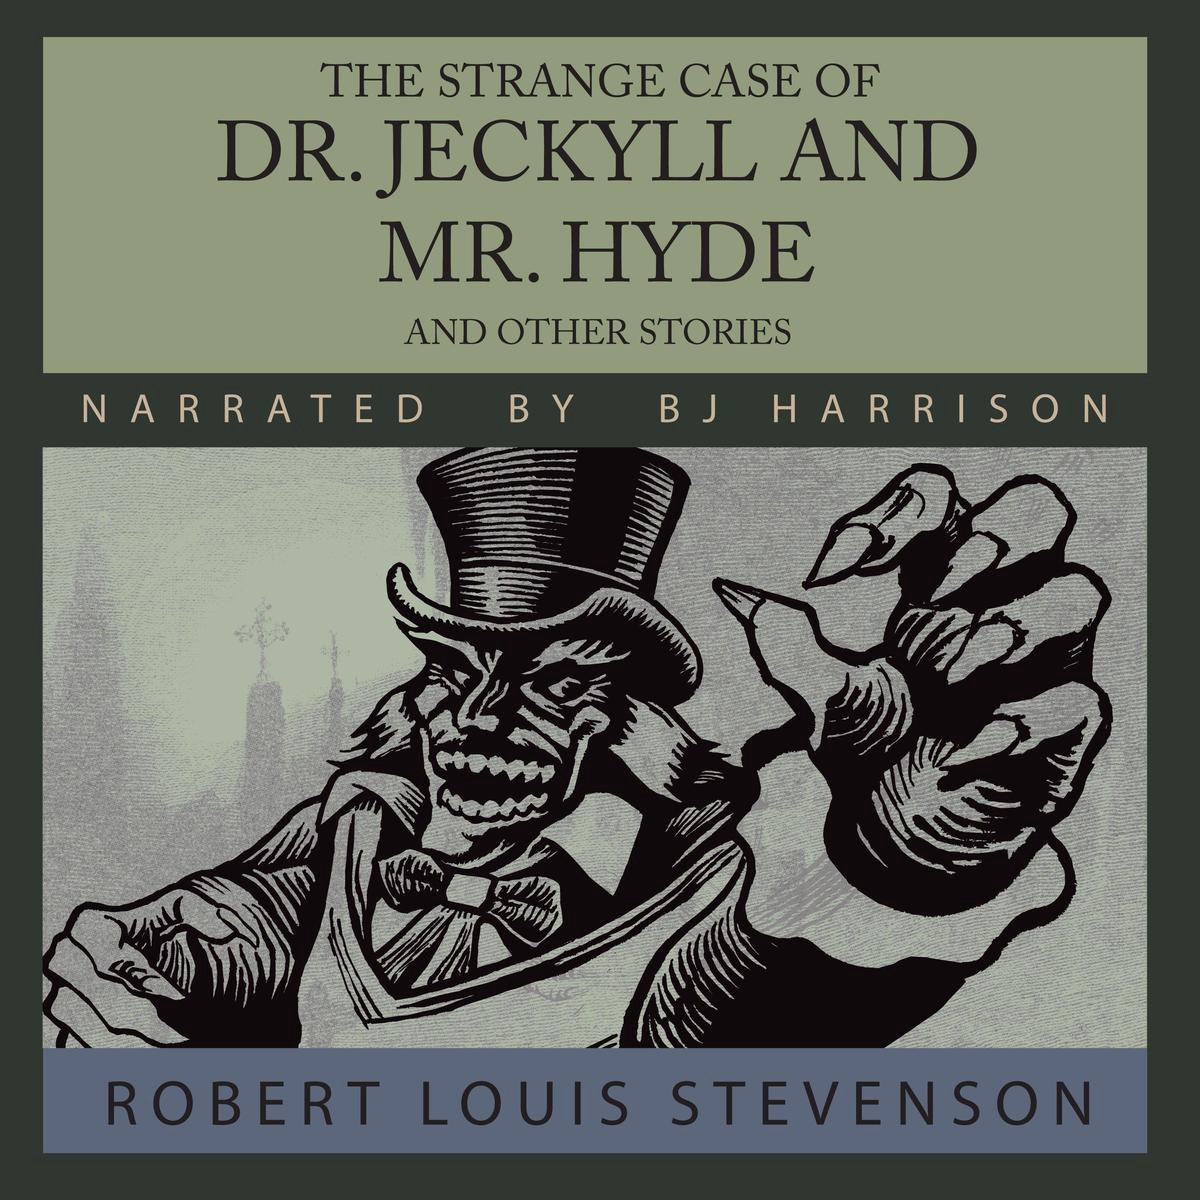 Strange Case of Dr. Jeckyll and Mr. Hyde and Other Stories, The - R.L. Stevenson